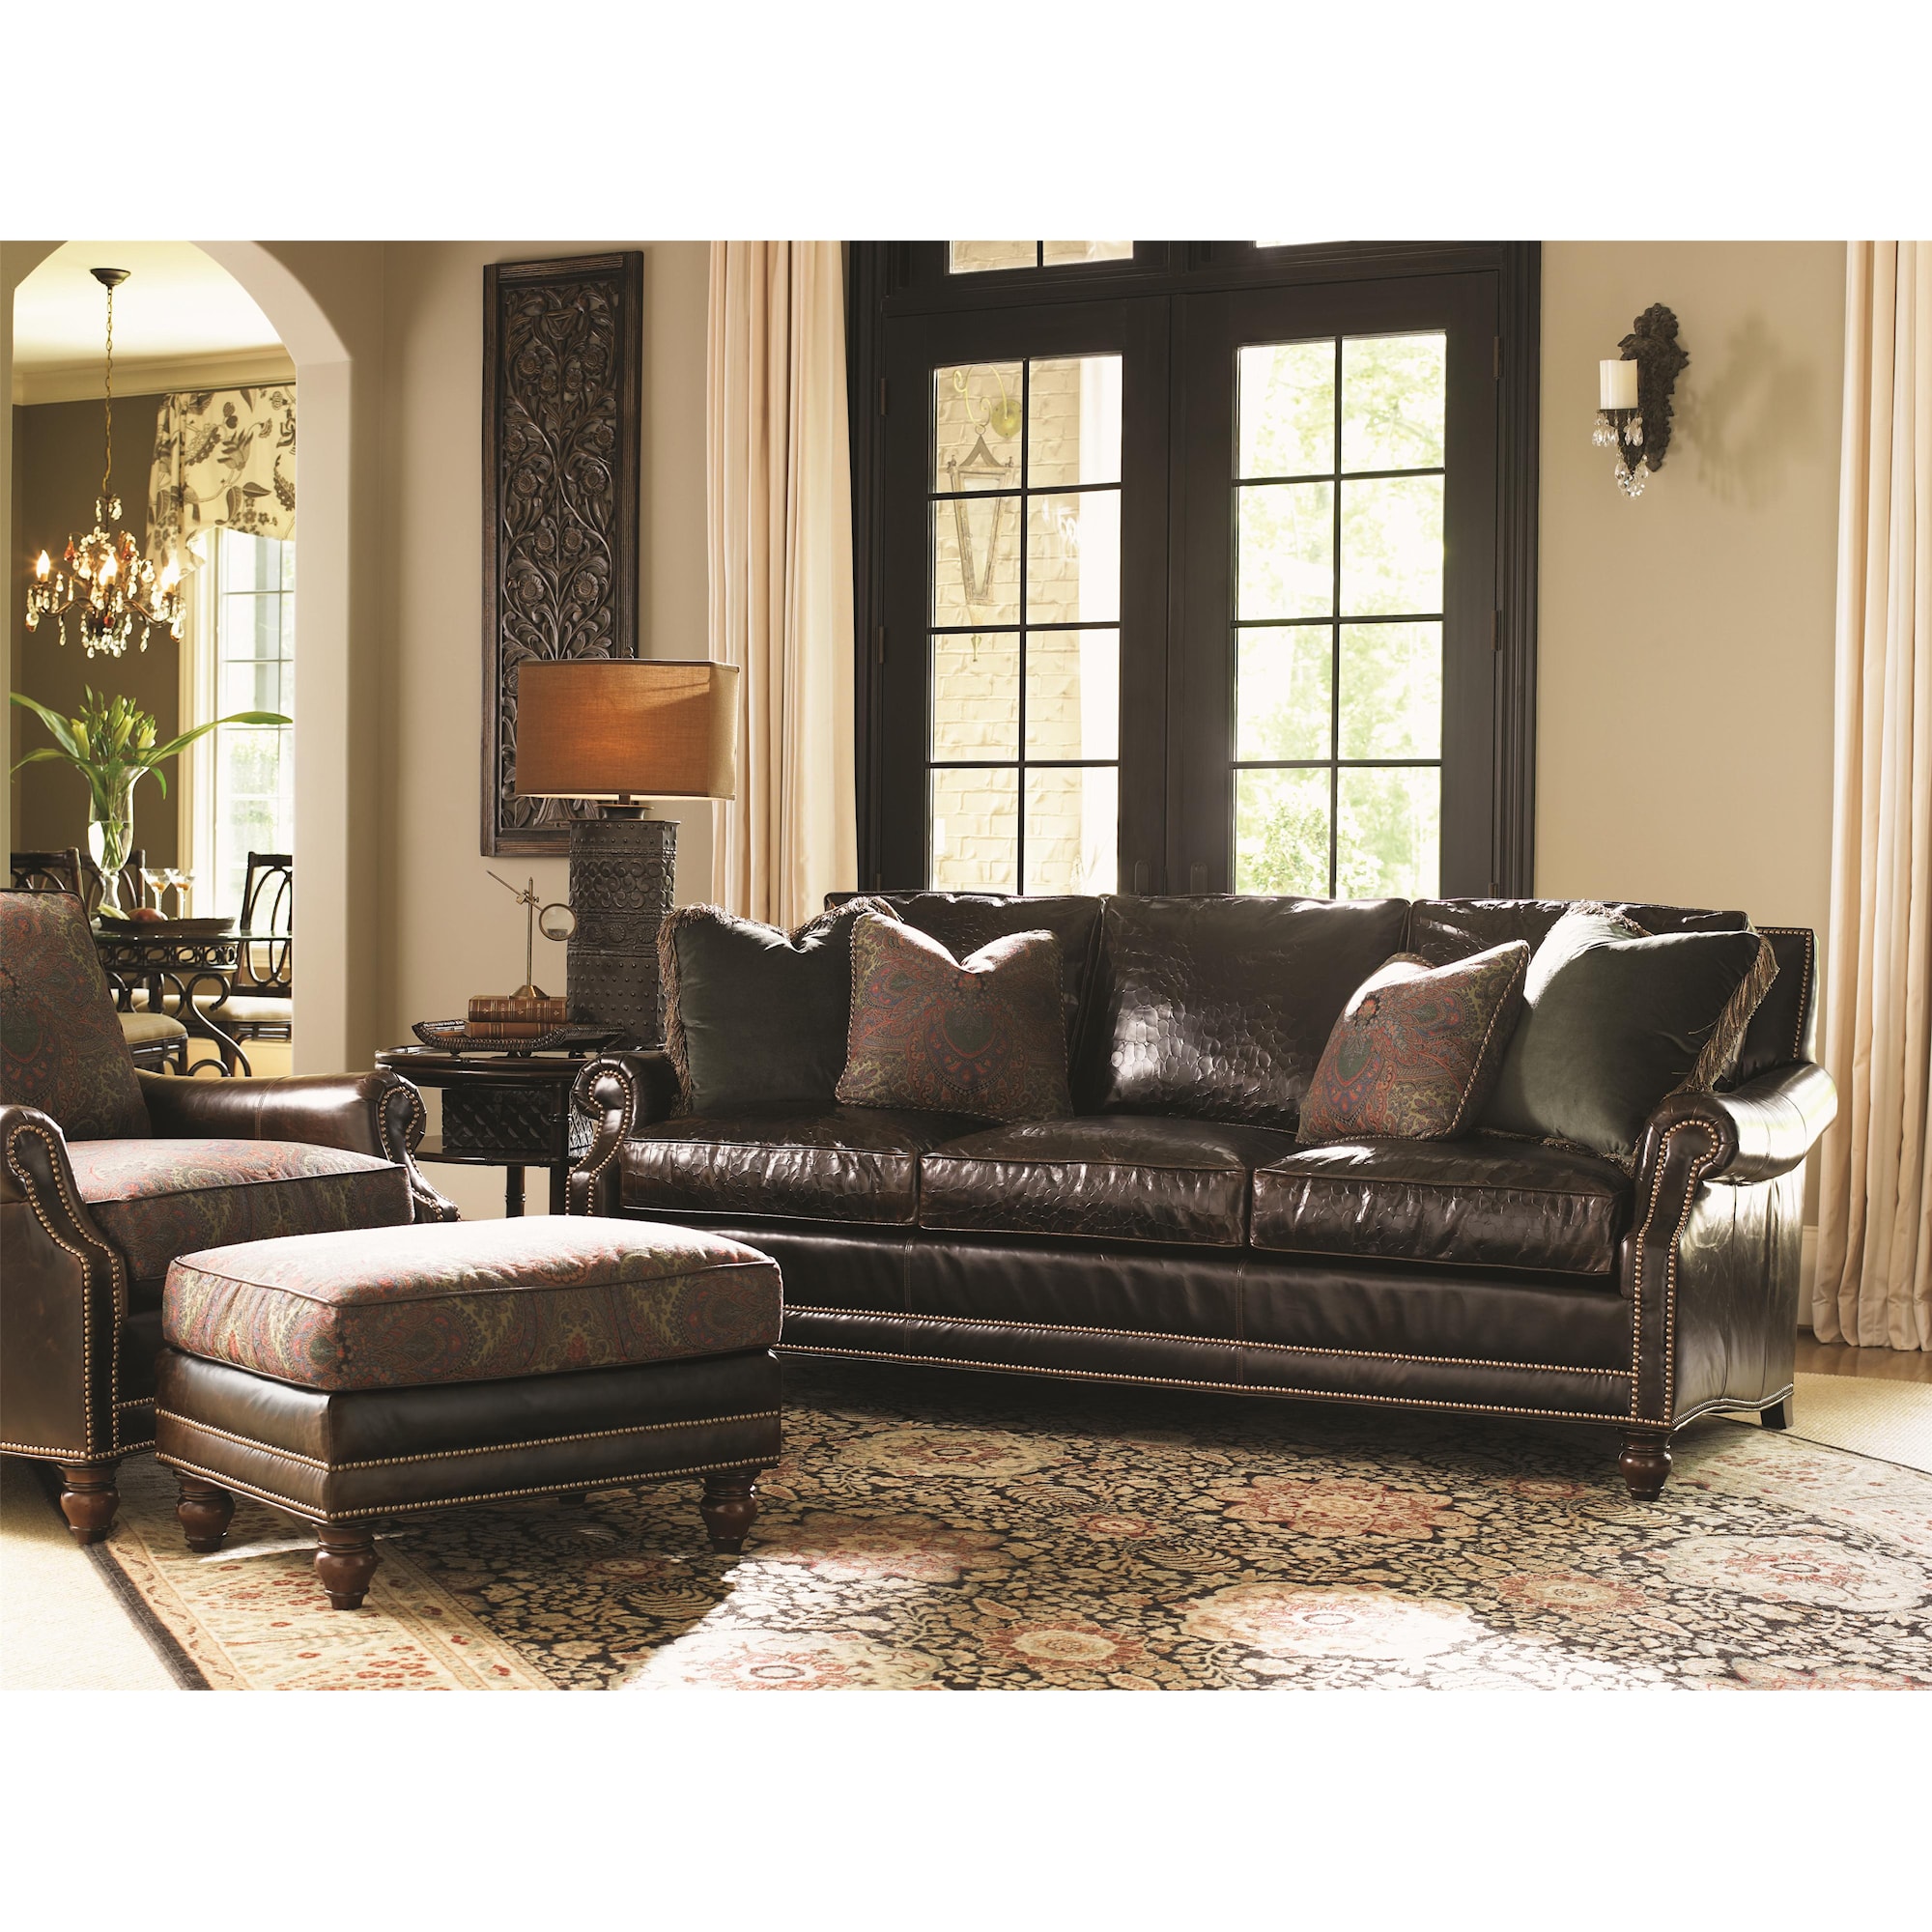 Tommy Bahama Home Tommy Bahama Upholstery LL7722-33 Shoal Creek Sofa with Turned Legs and Nailhead | Jacksonville Furniture Mart | Sofas